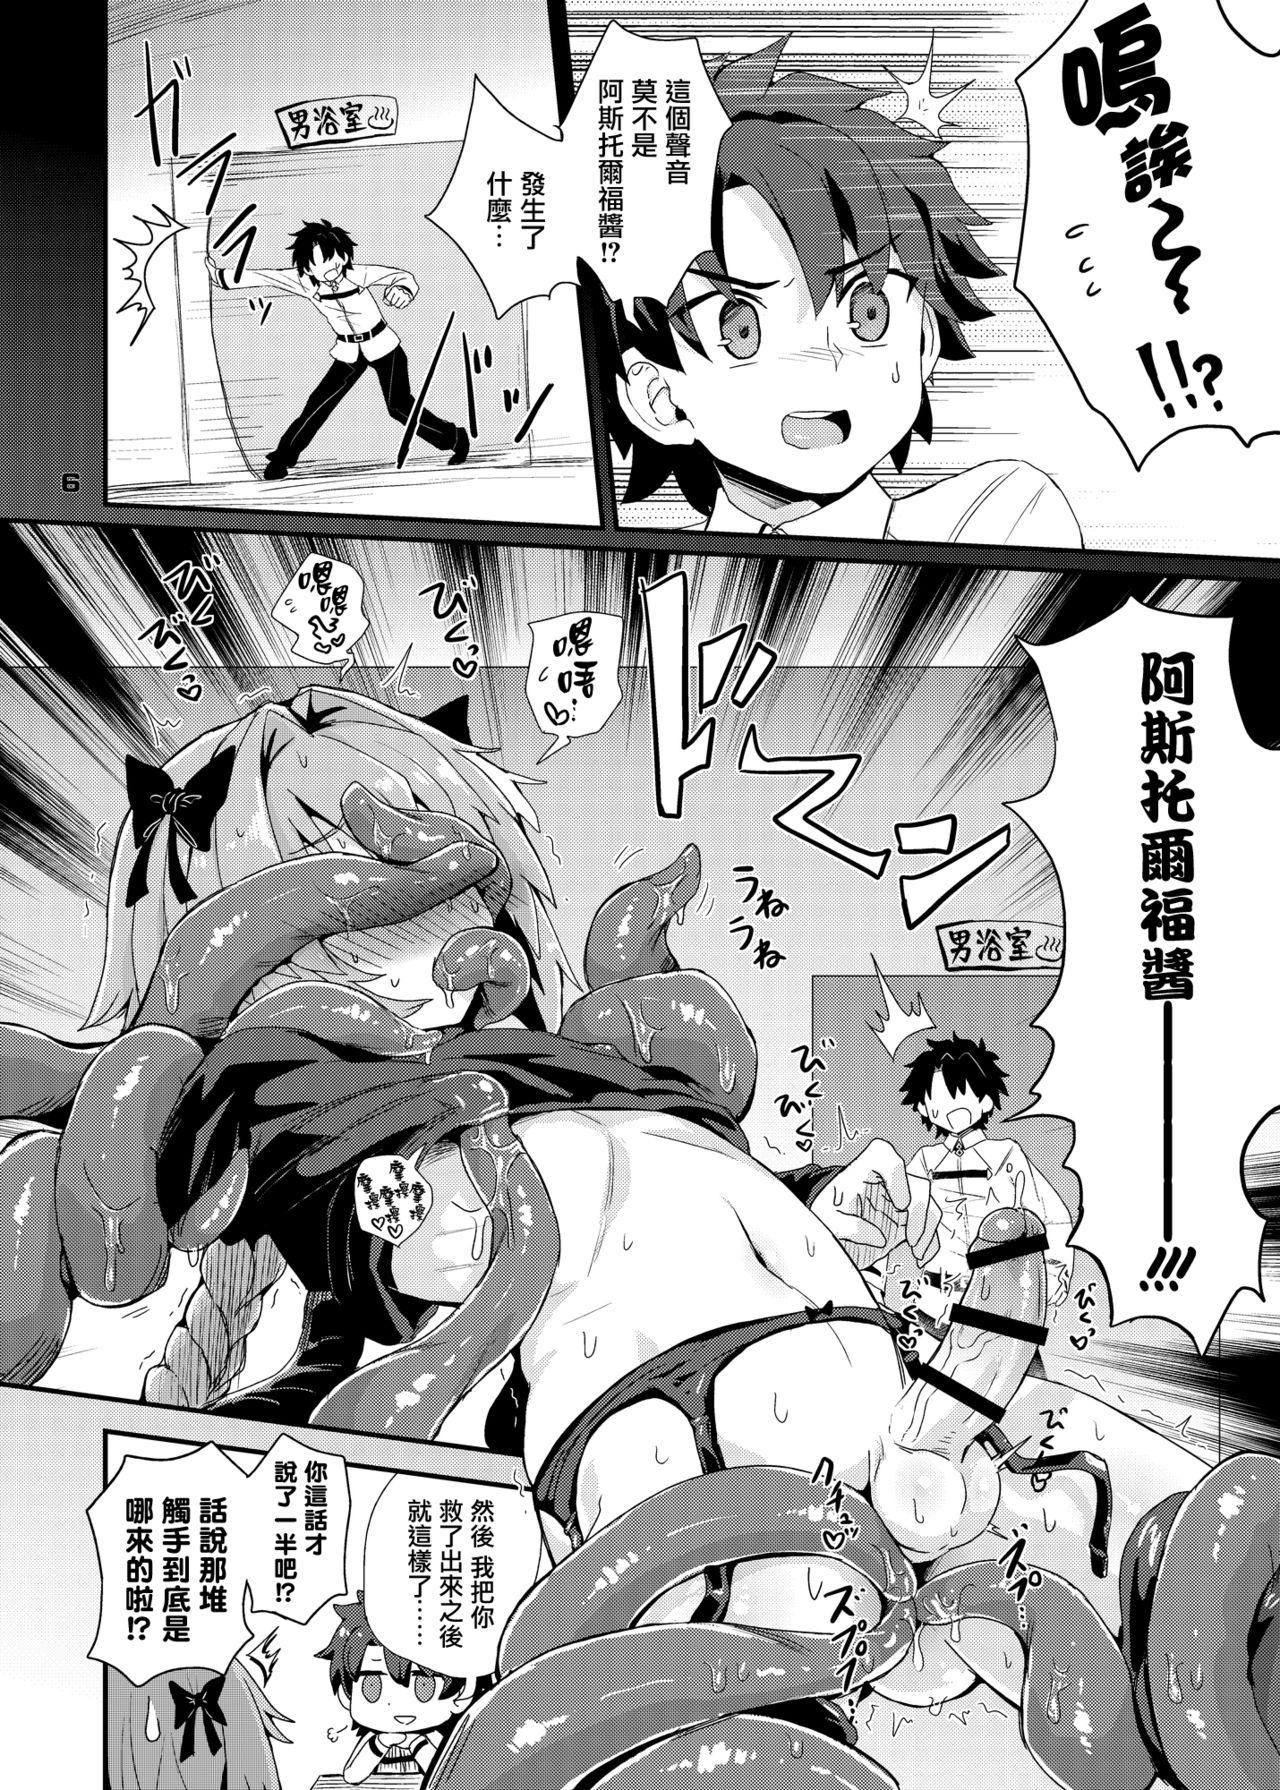 Hiddencam Trap of Astolfo - Fate grand order Hairypussy - Page 6